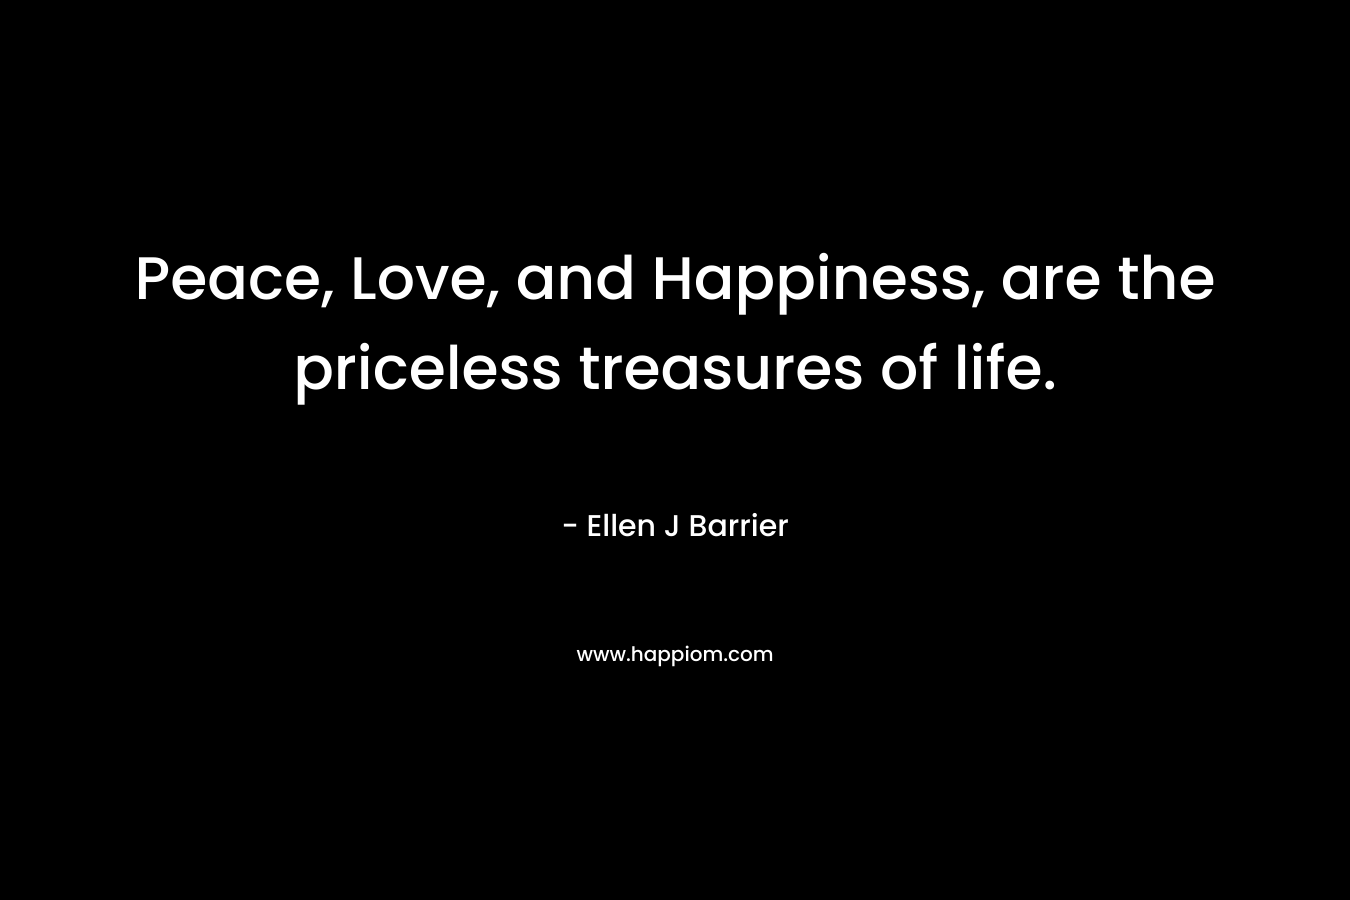 Peace, Love, and Happiness, are the priceless treasures of life.